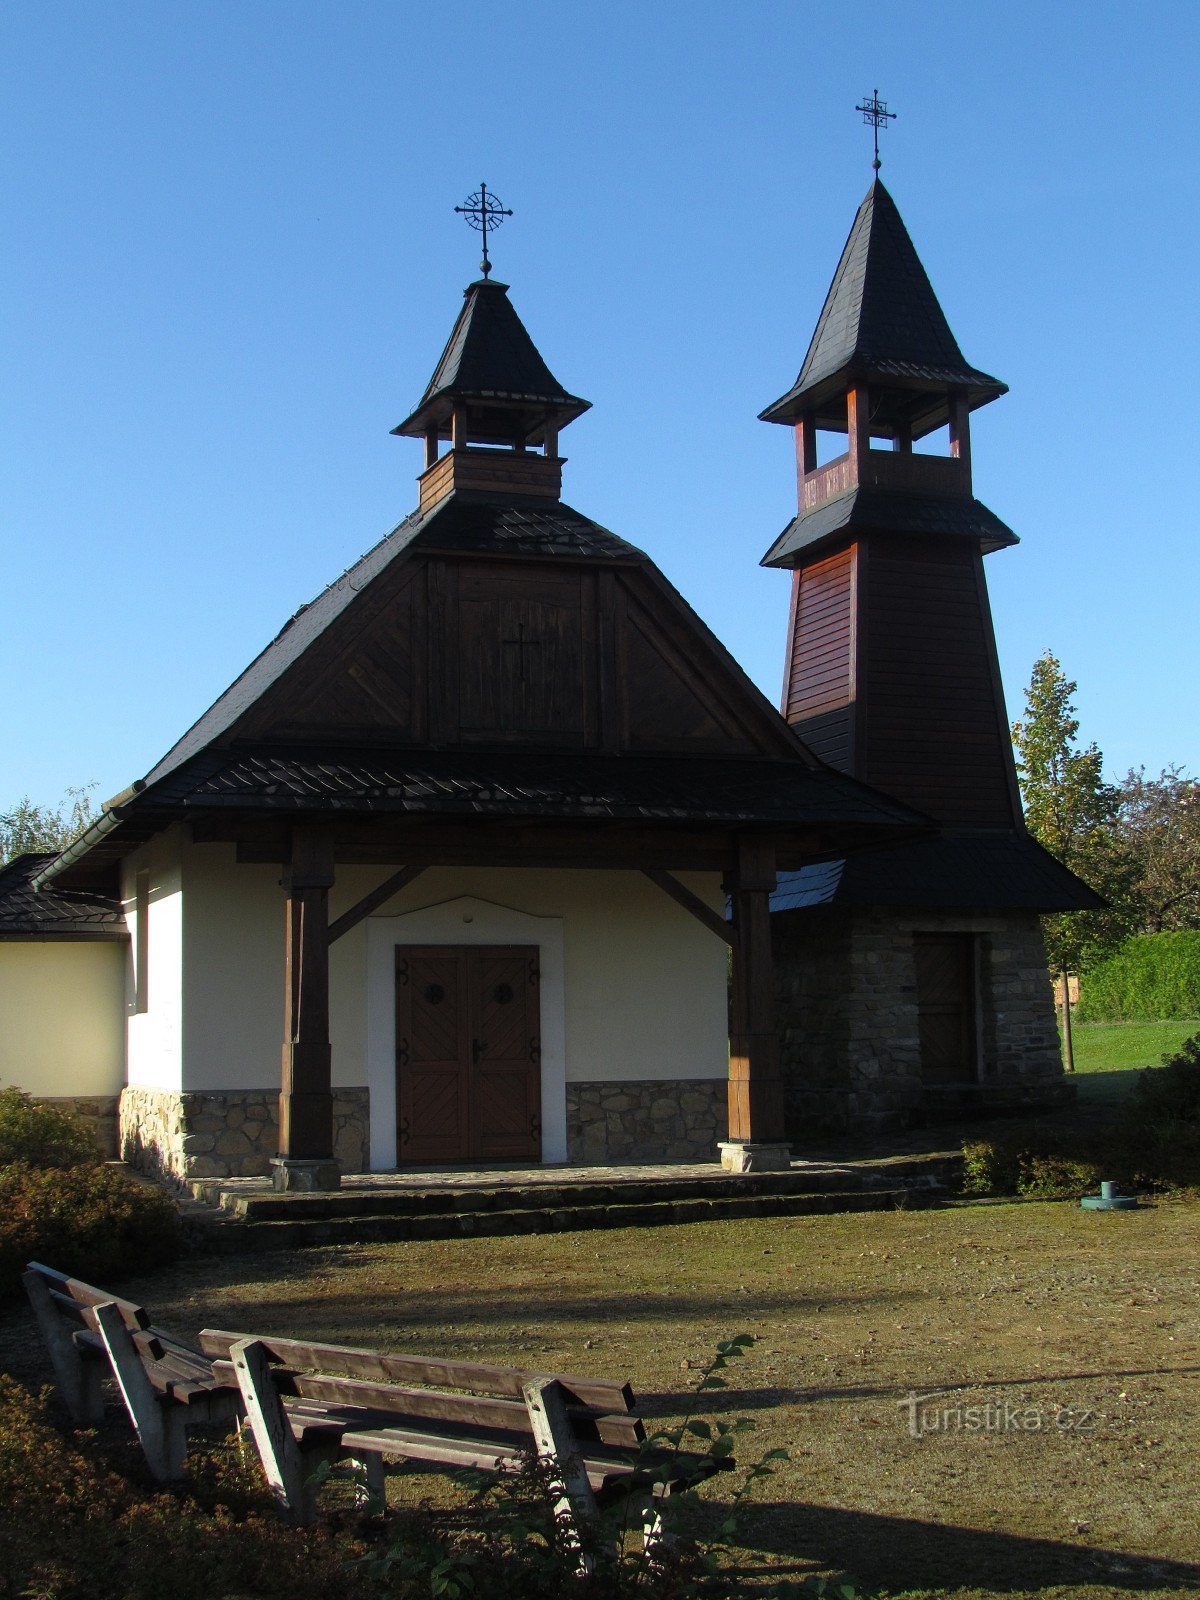 Veliková - chapel of St. Cyril and Methodius